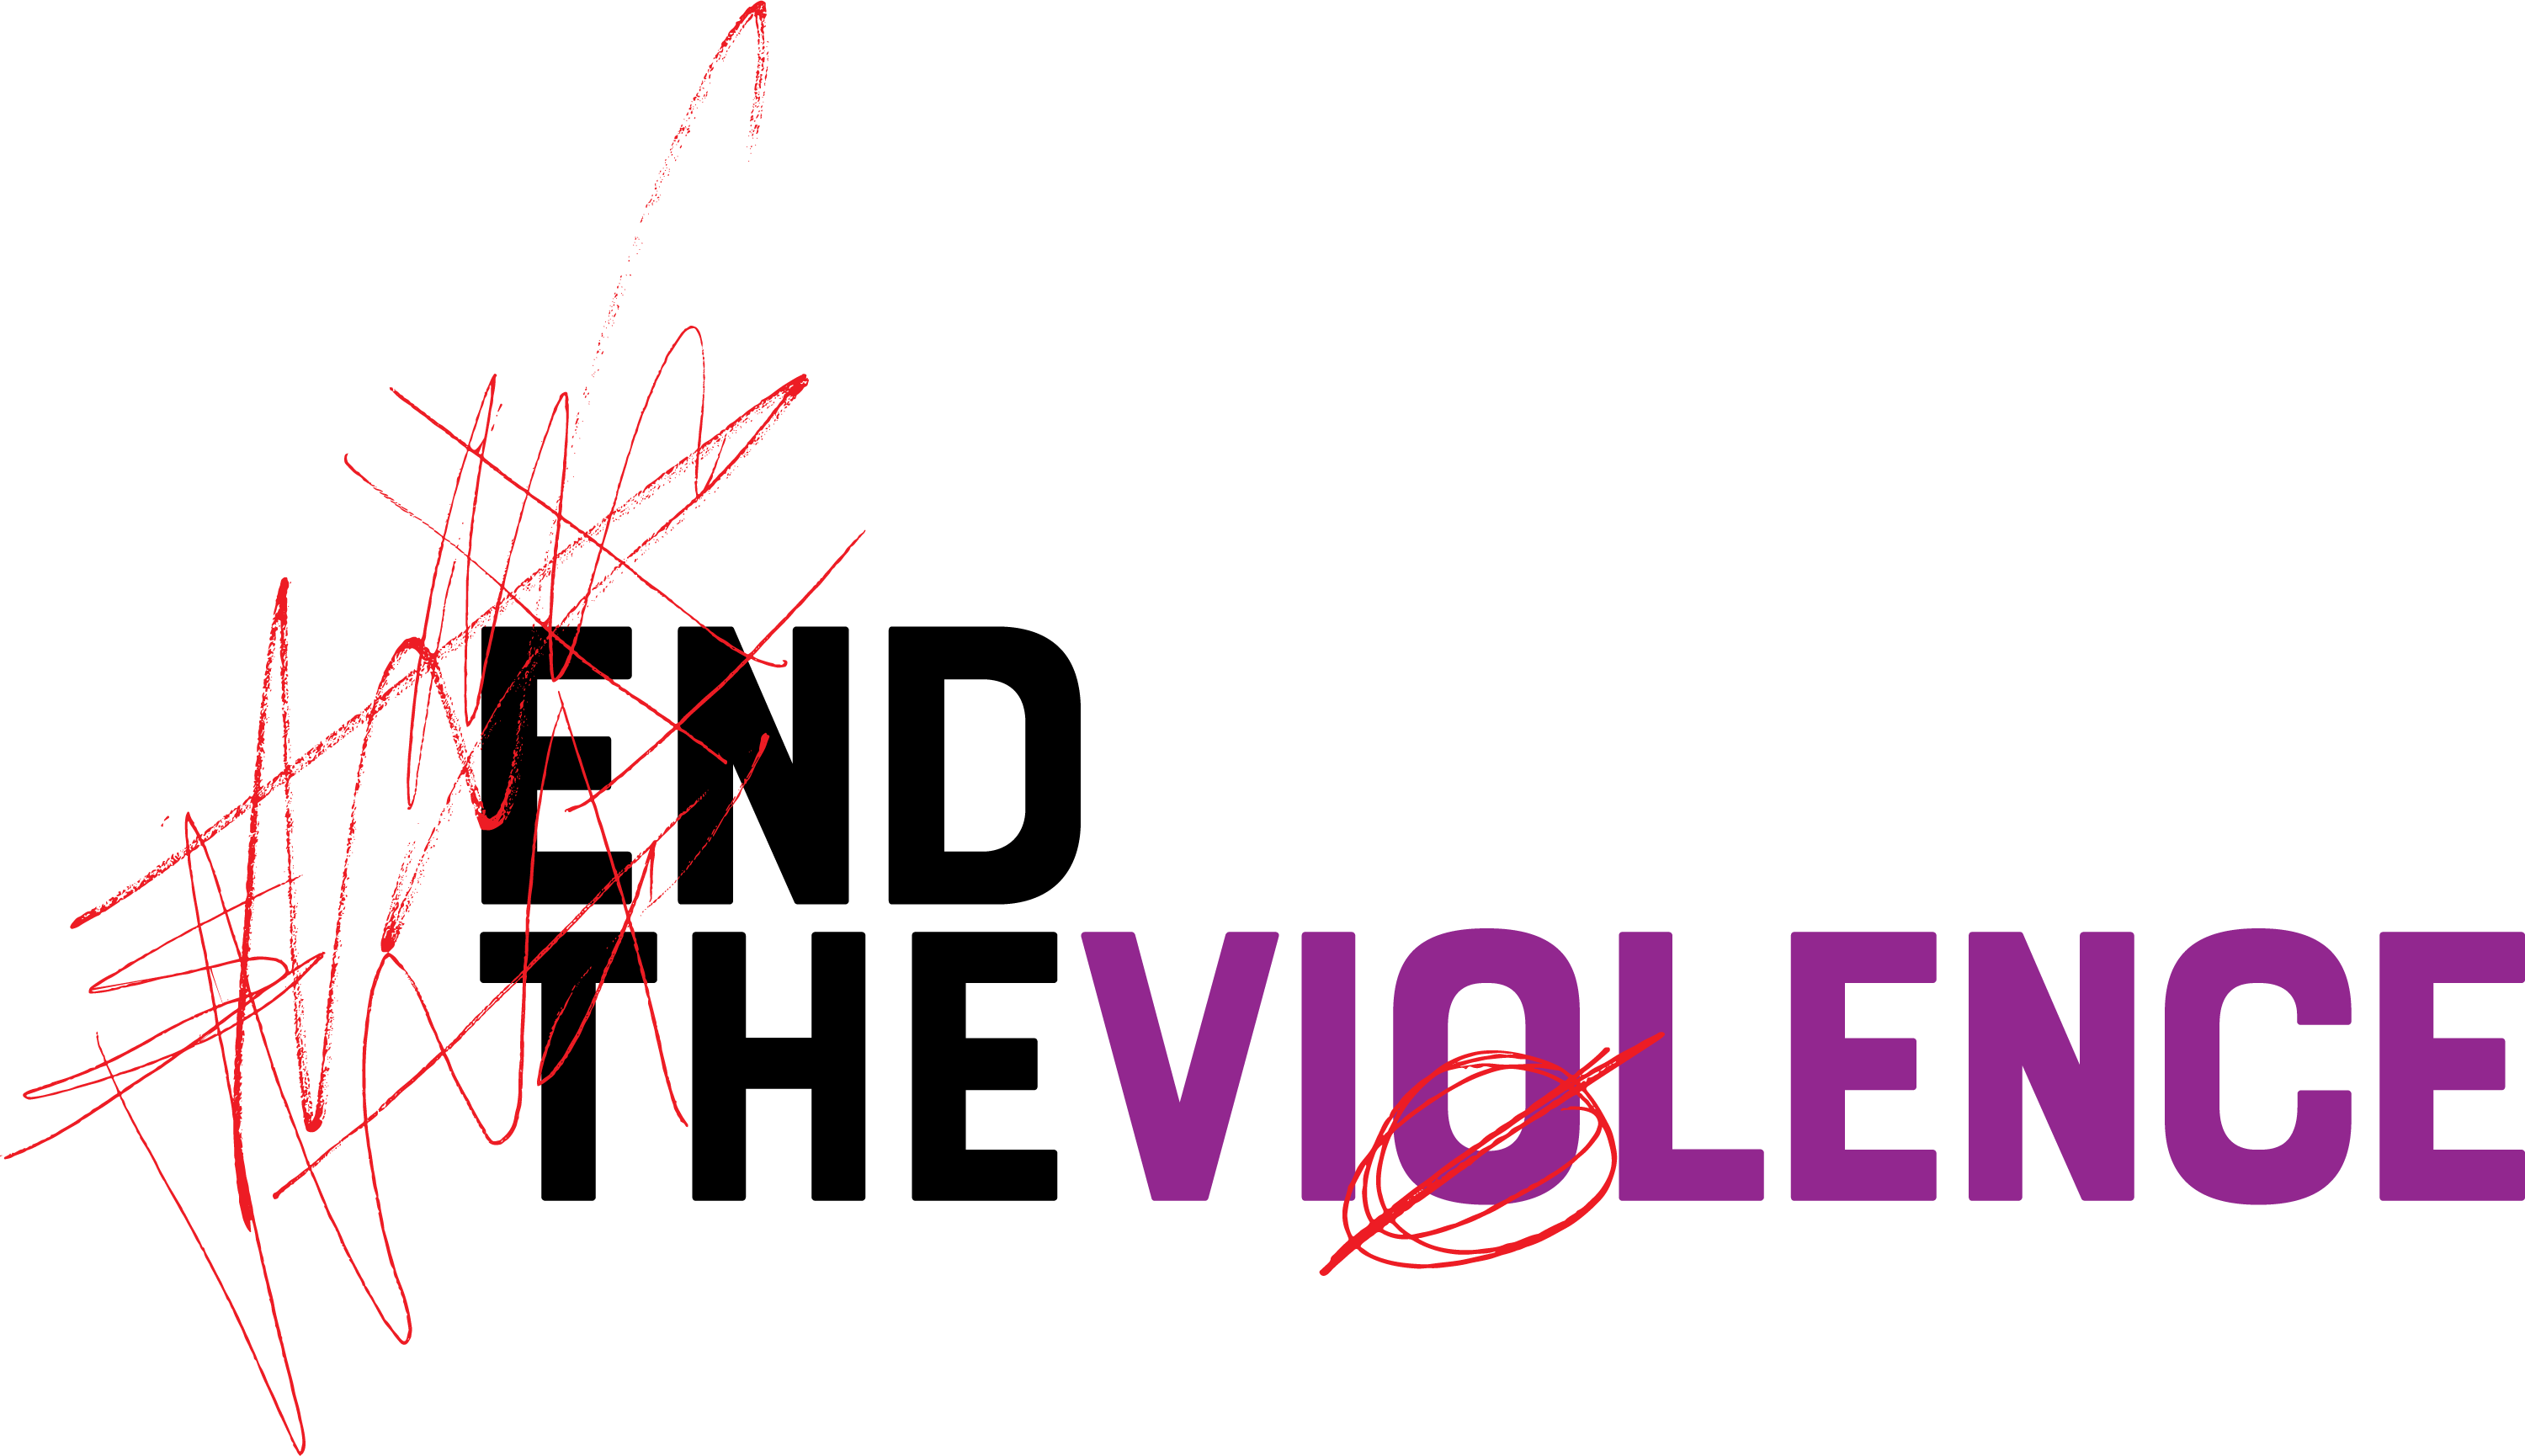 End the Violence